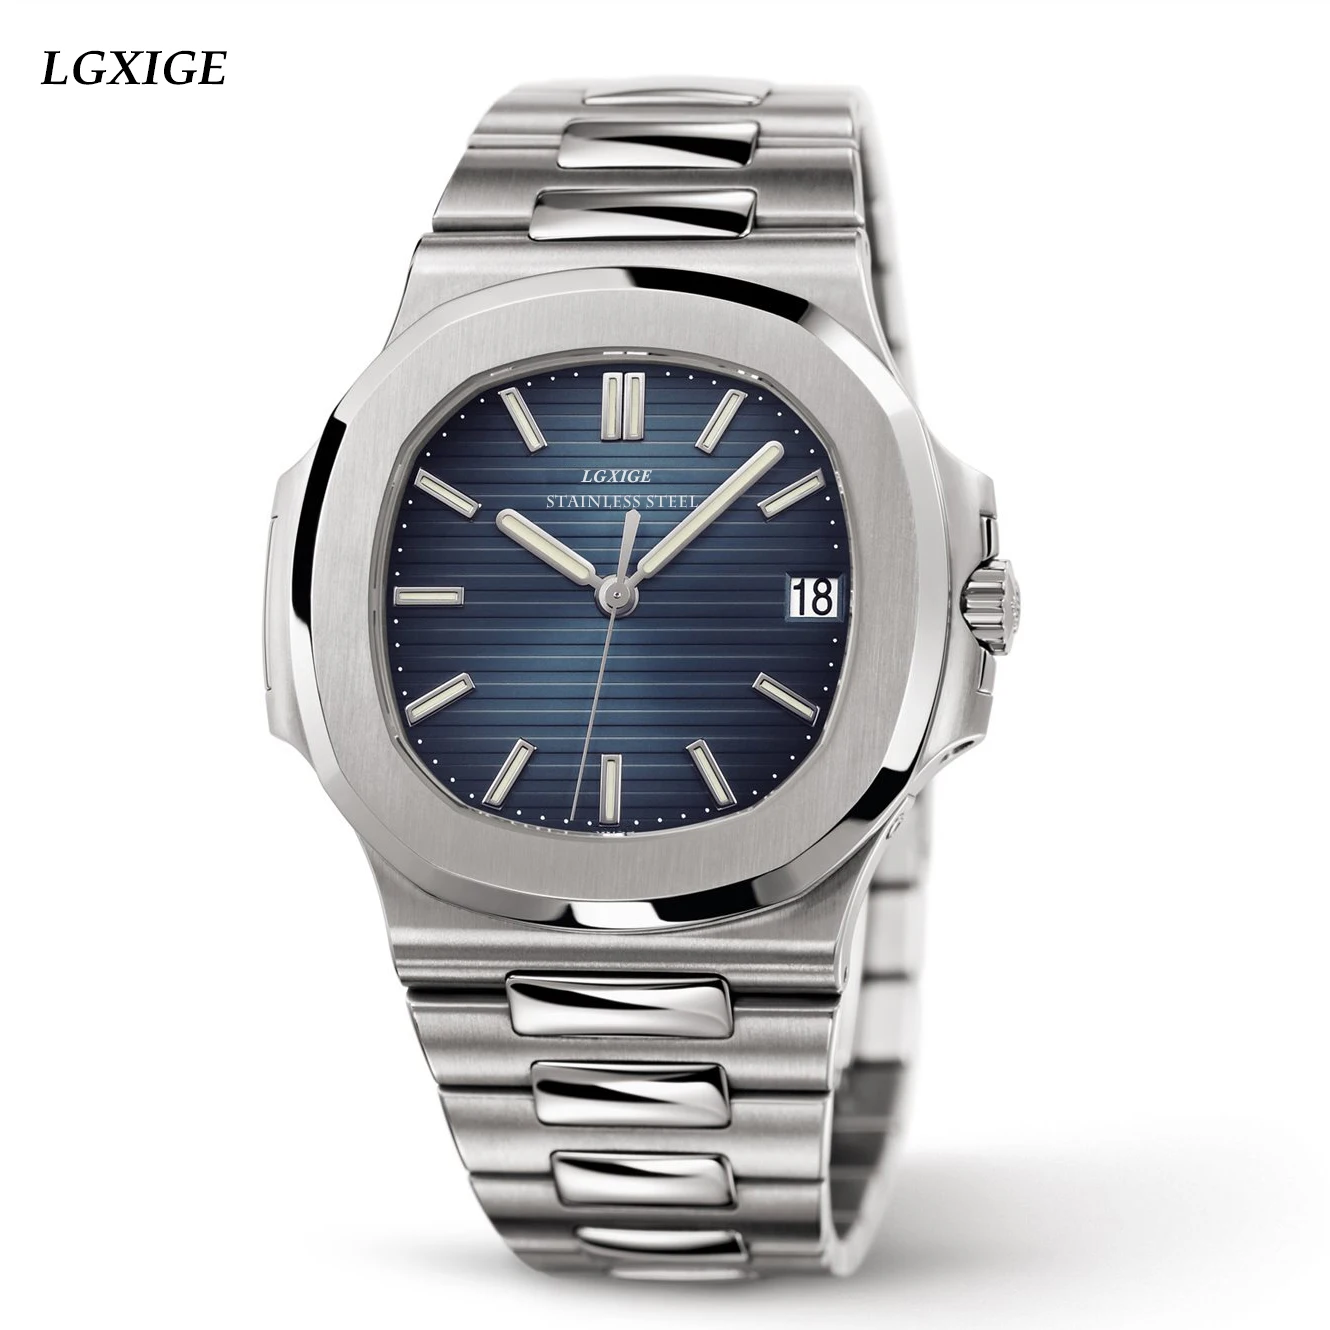 LGXIGE Men's Watches Top Brand Luxury watches men quartz stainless steel army watch chronograph aaa male sport wrist watch 2021